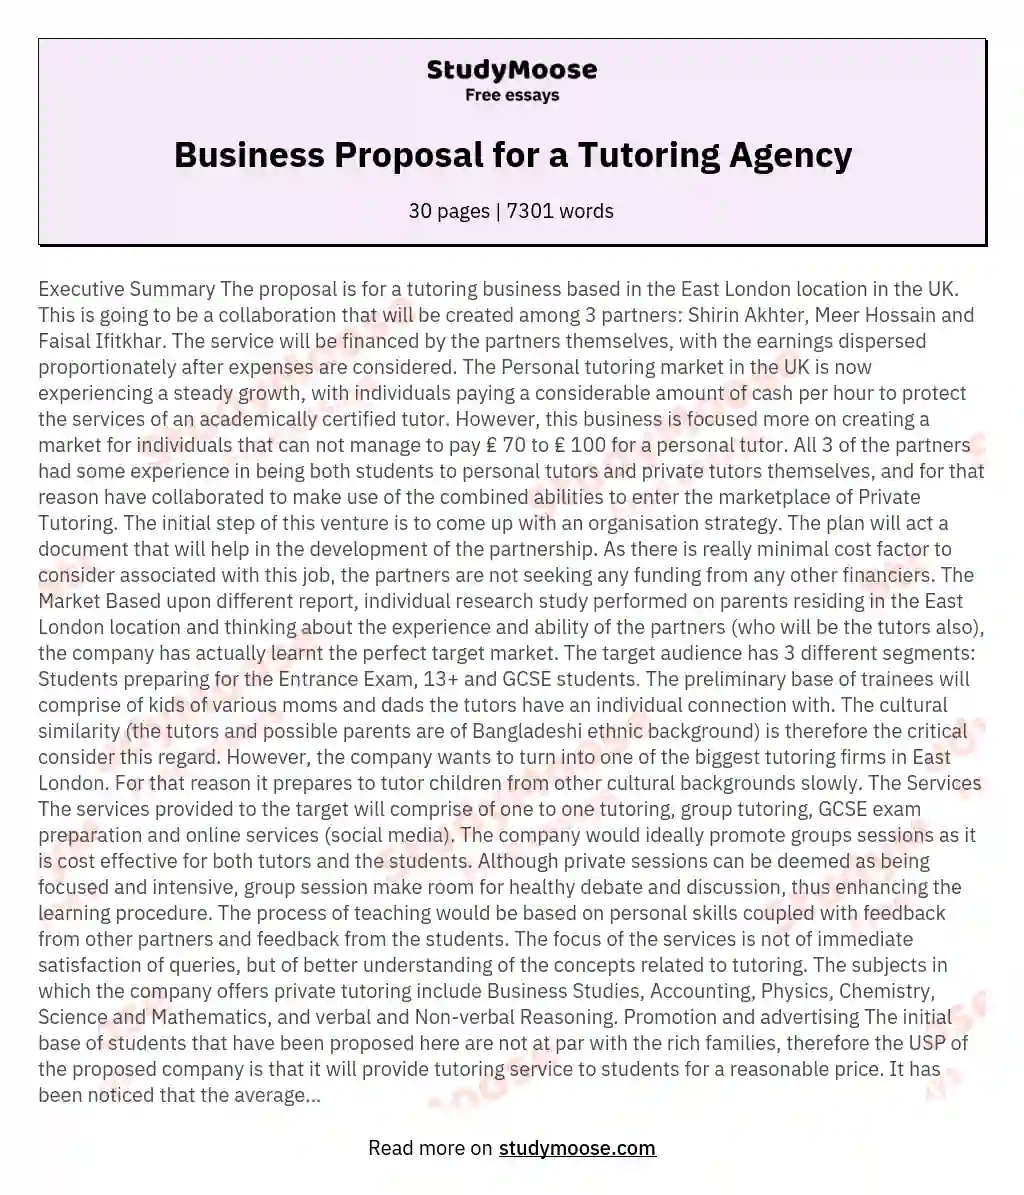 Business Proposal for a Tutoring Agency essay